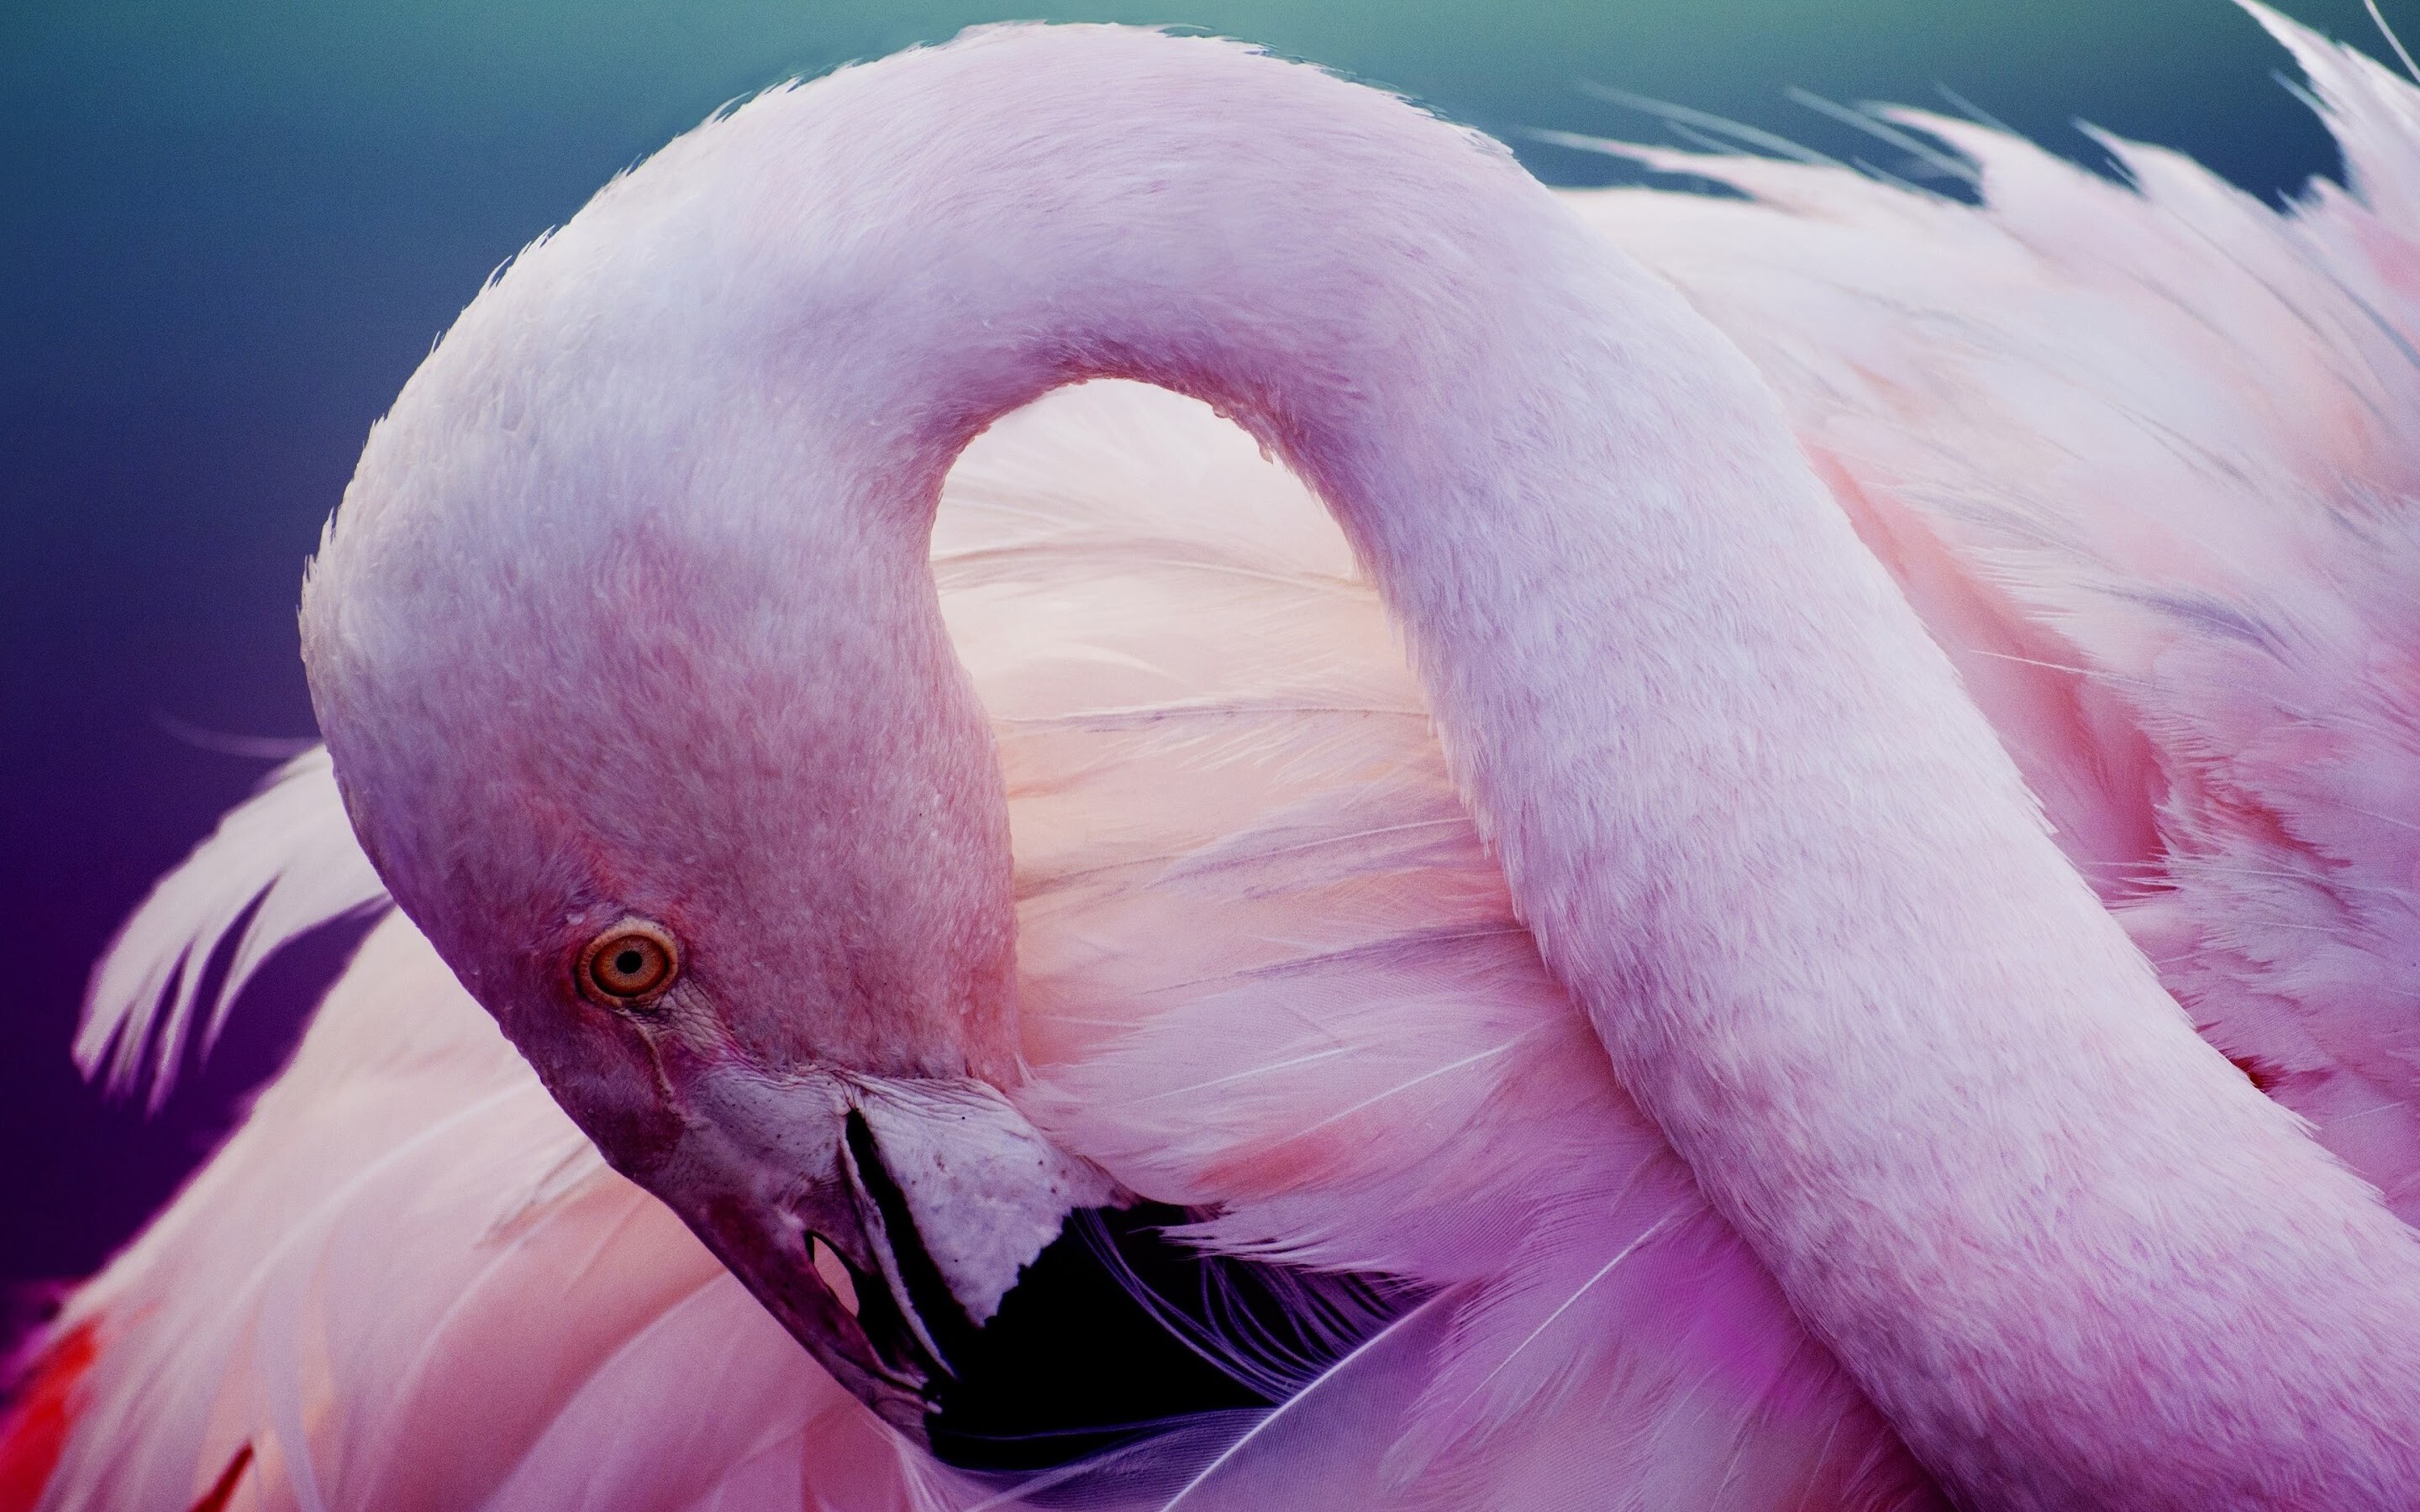 Flamingo: The pink and reddish colors of a flamingo's feathers come from eating pigments found in algae and invertebrates. 2880x1800 HD Wallpaper.